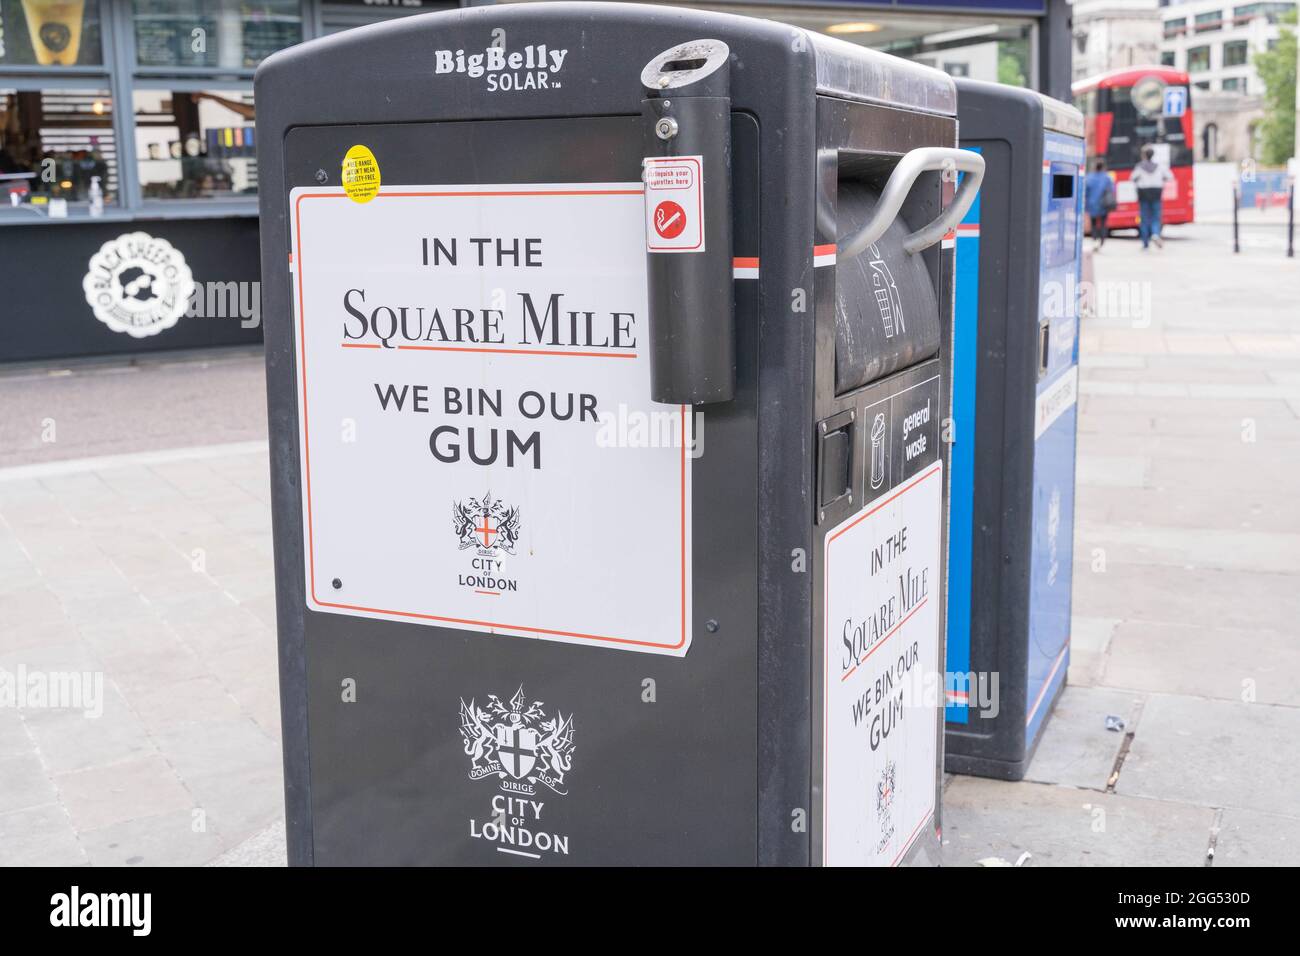 public waste bin with message showing 'IN the SQUARE MILE we BIN OUR GUM' Stock Photo